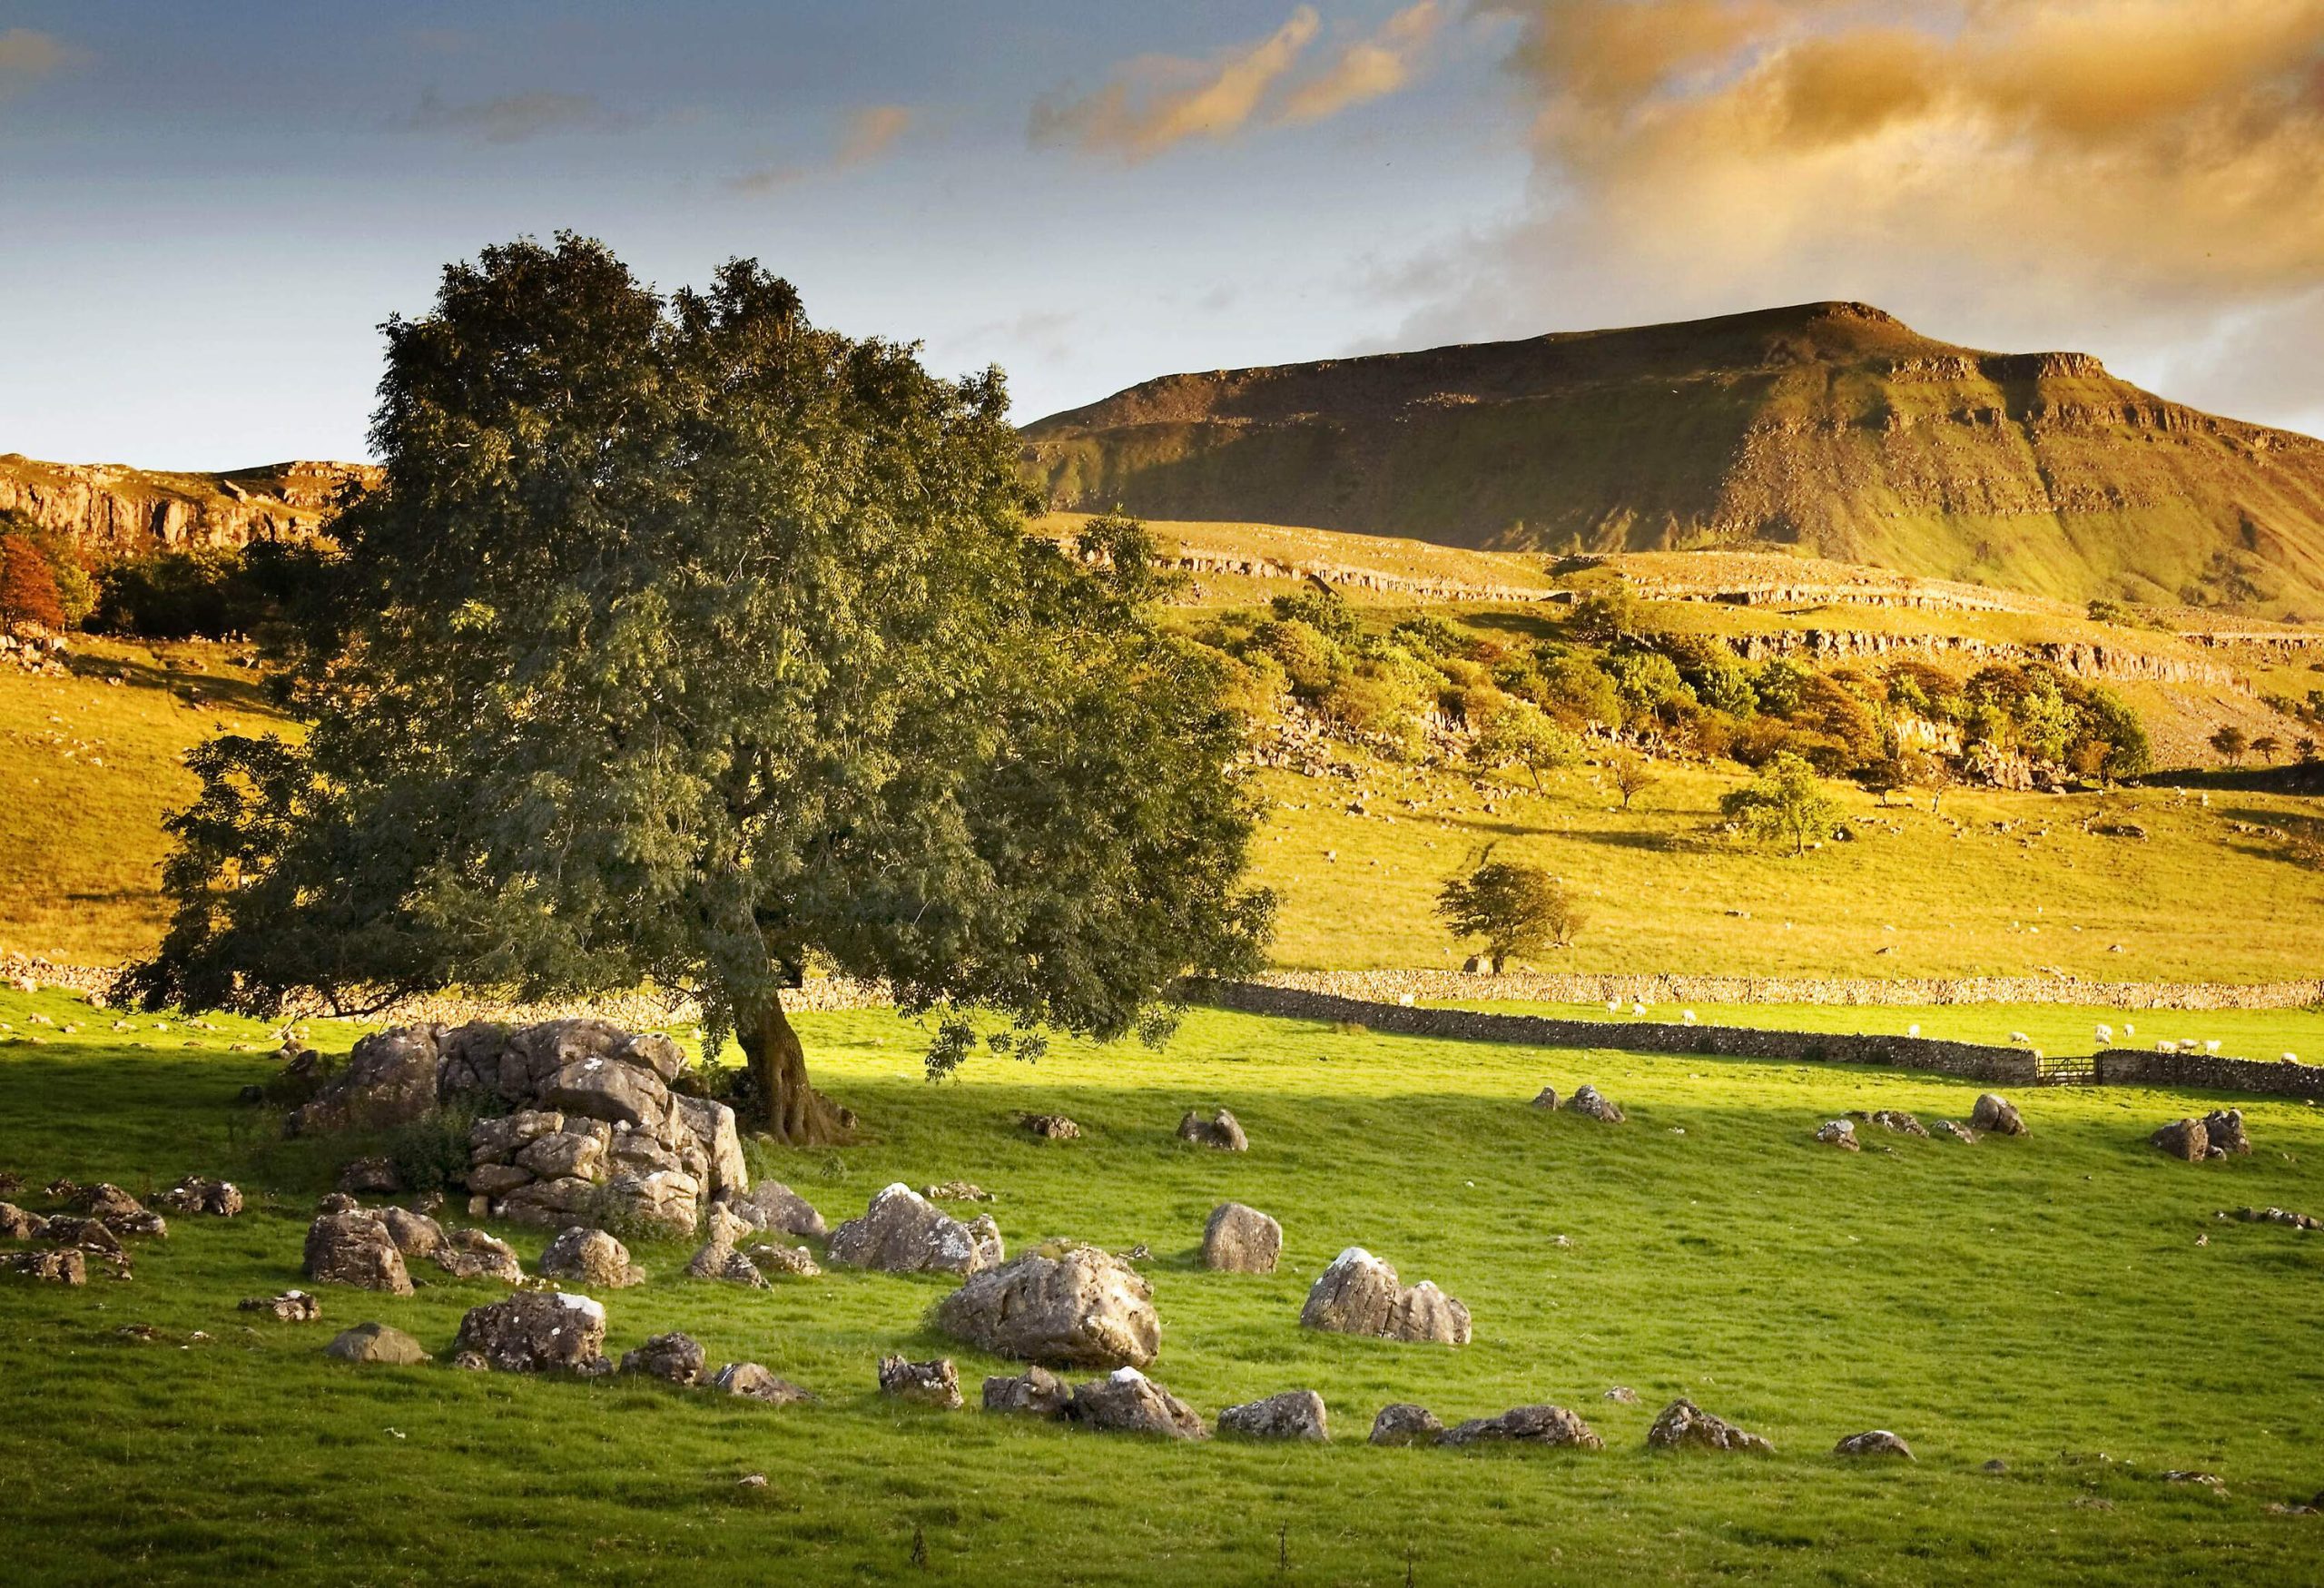 Trees and limestones dot the broad grasslands, while a verdant hill bathed in sunlight can be seen off in the distance.